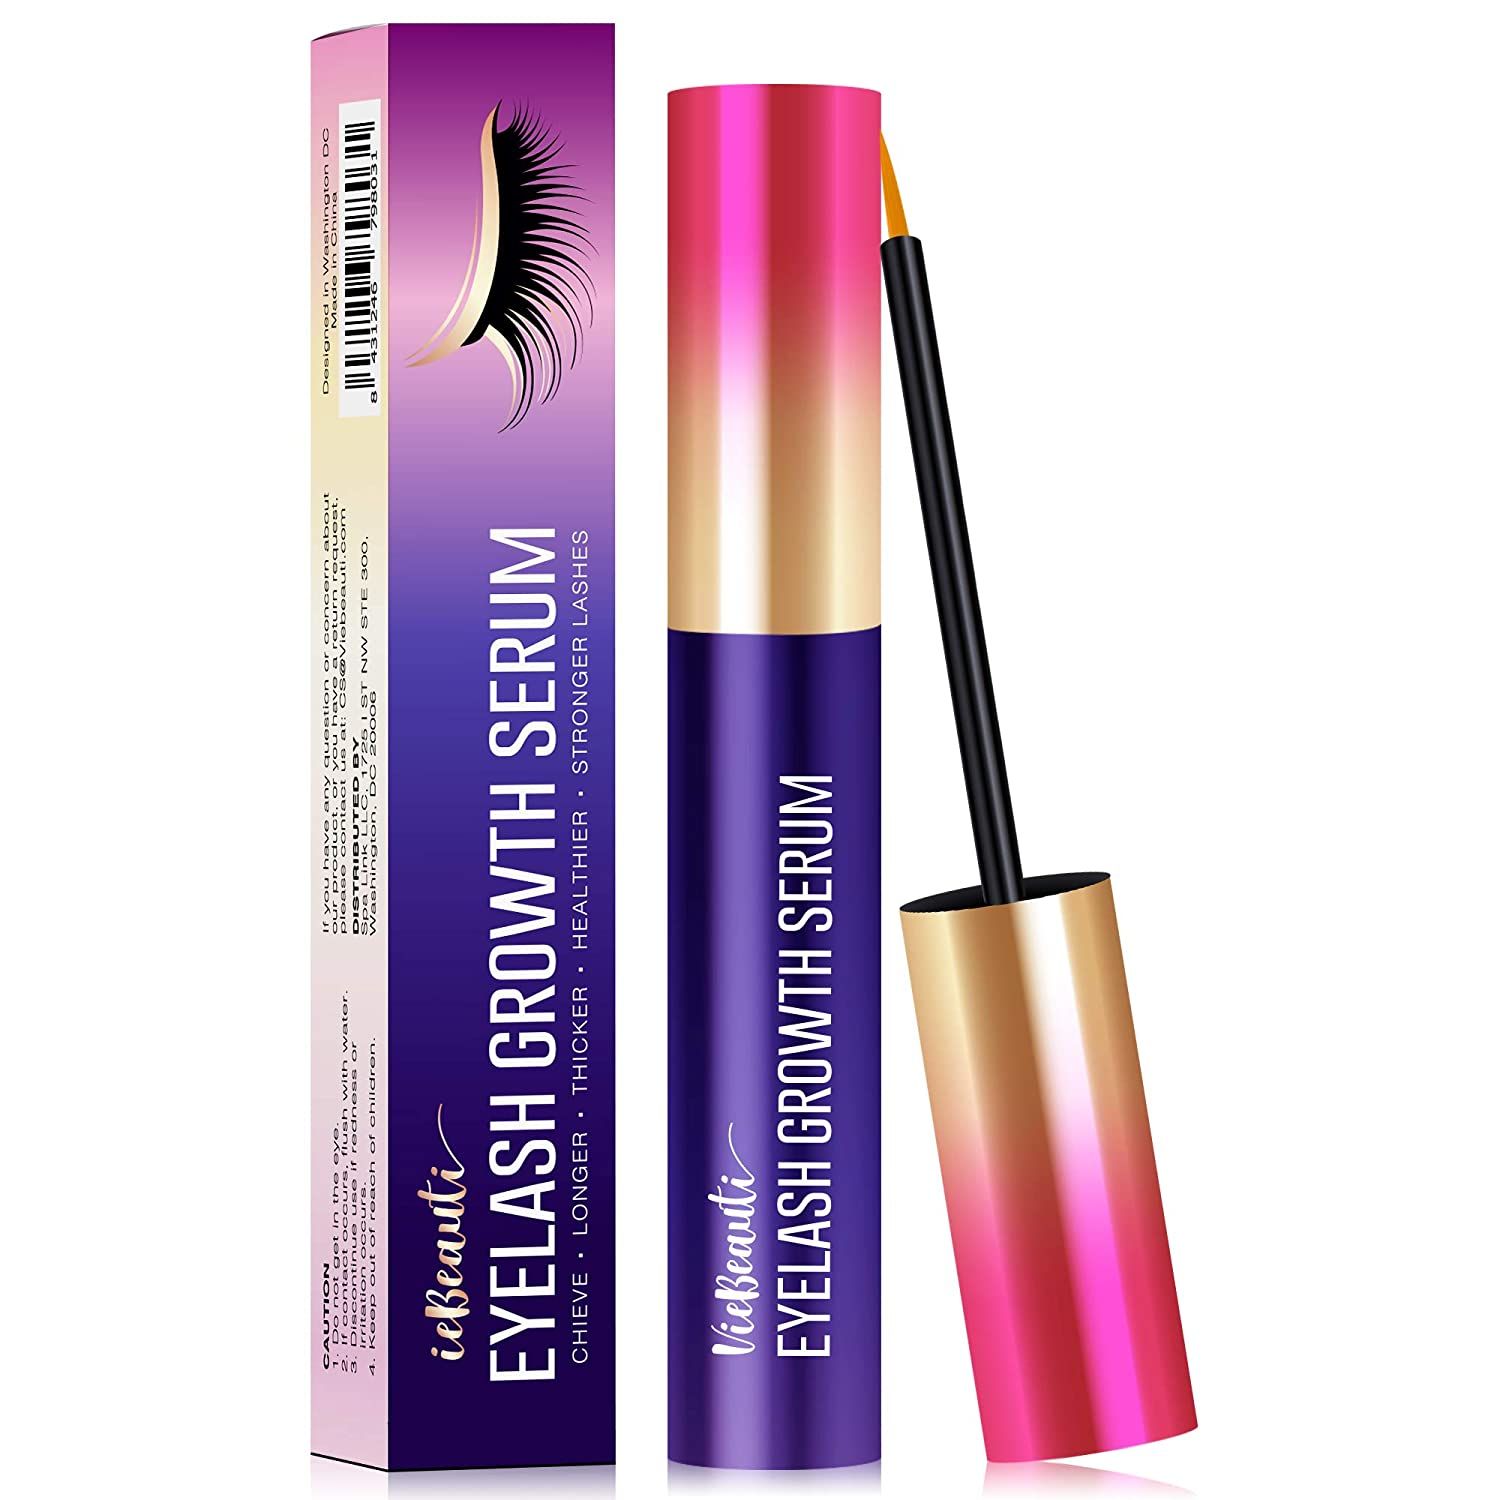 The Best Eyelash Growth Serums of 2021 — ReviewThis